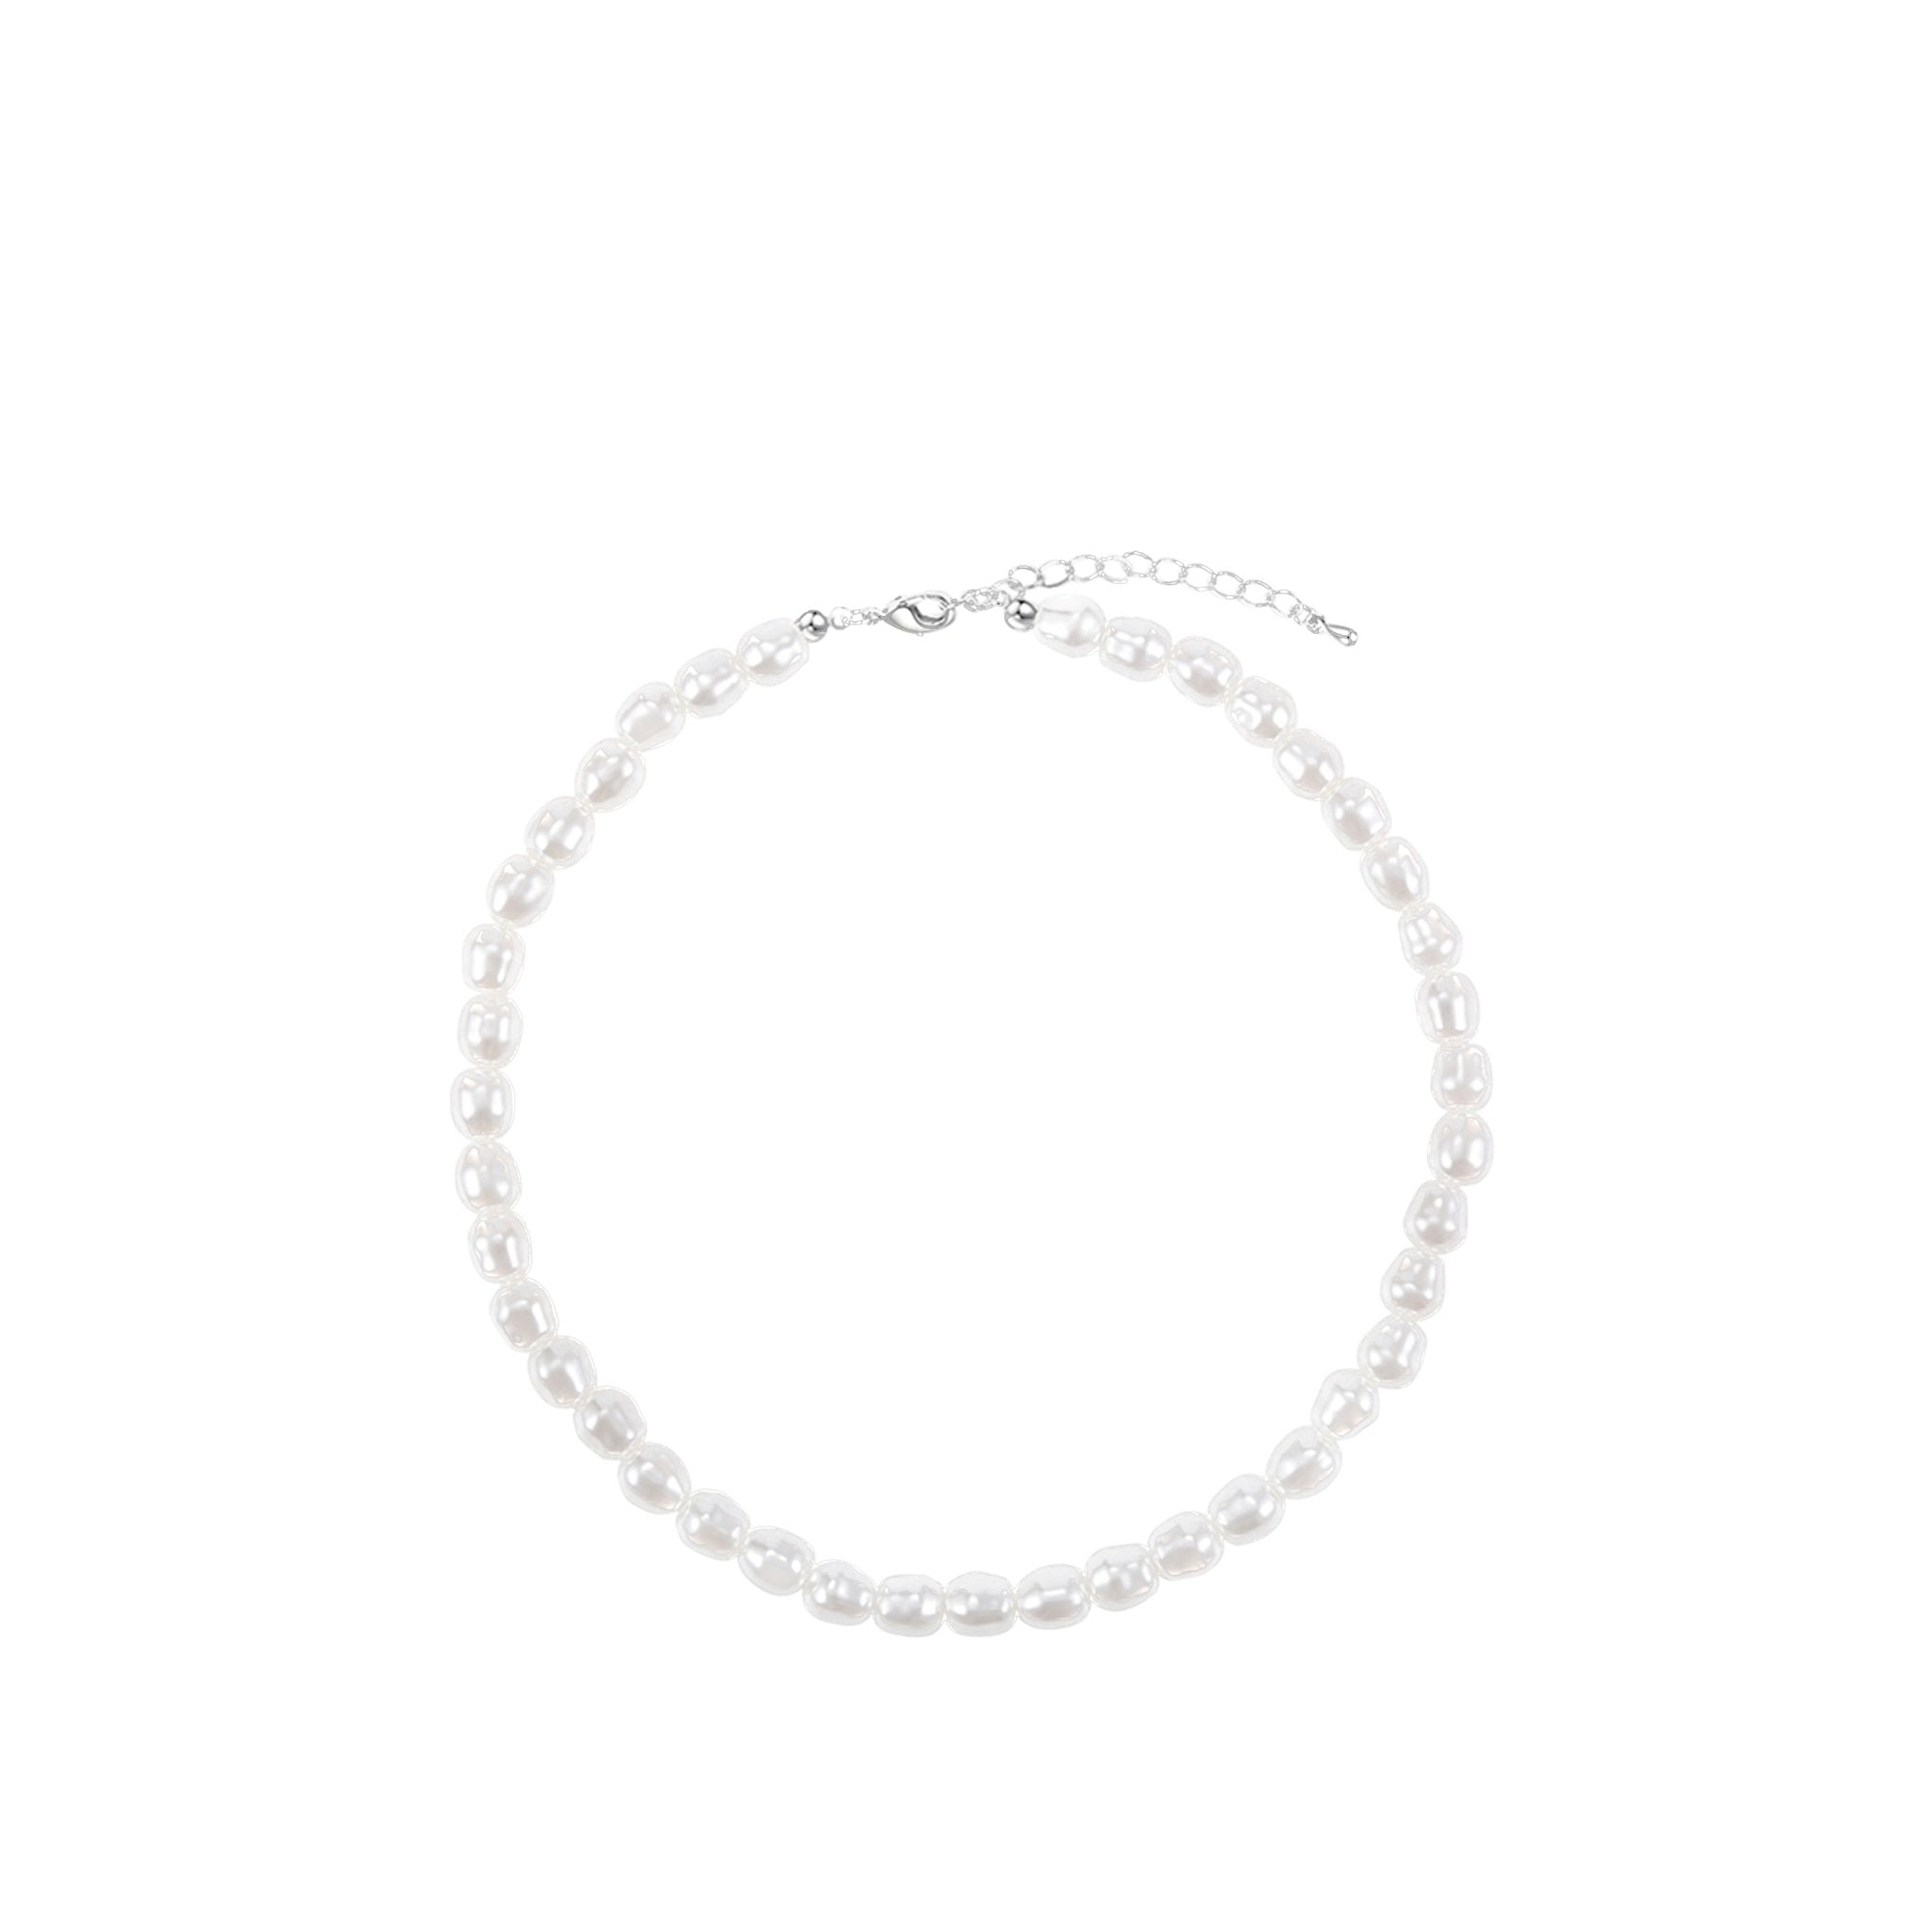 Crystal Embellished Pearl Choker In White Magda Butrym, 43% OFF